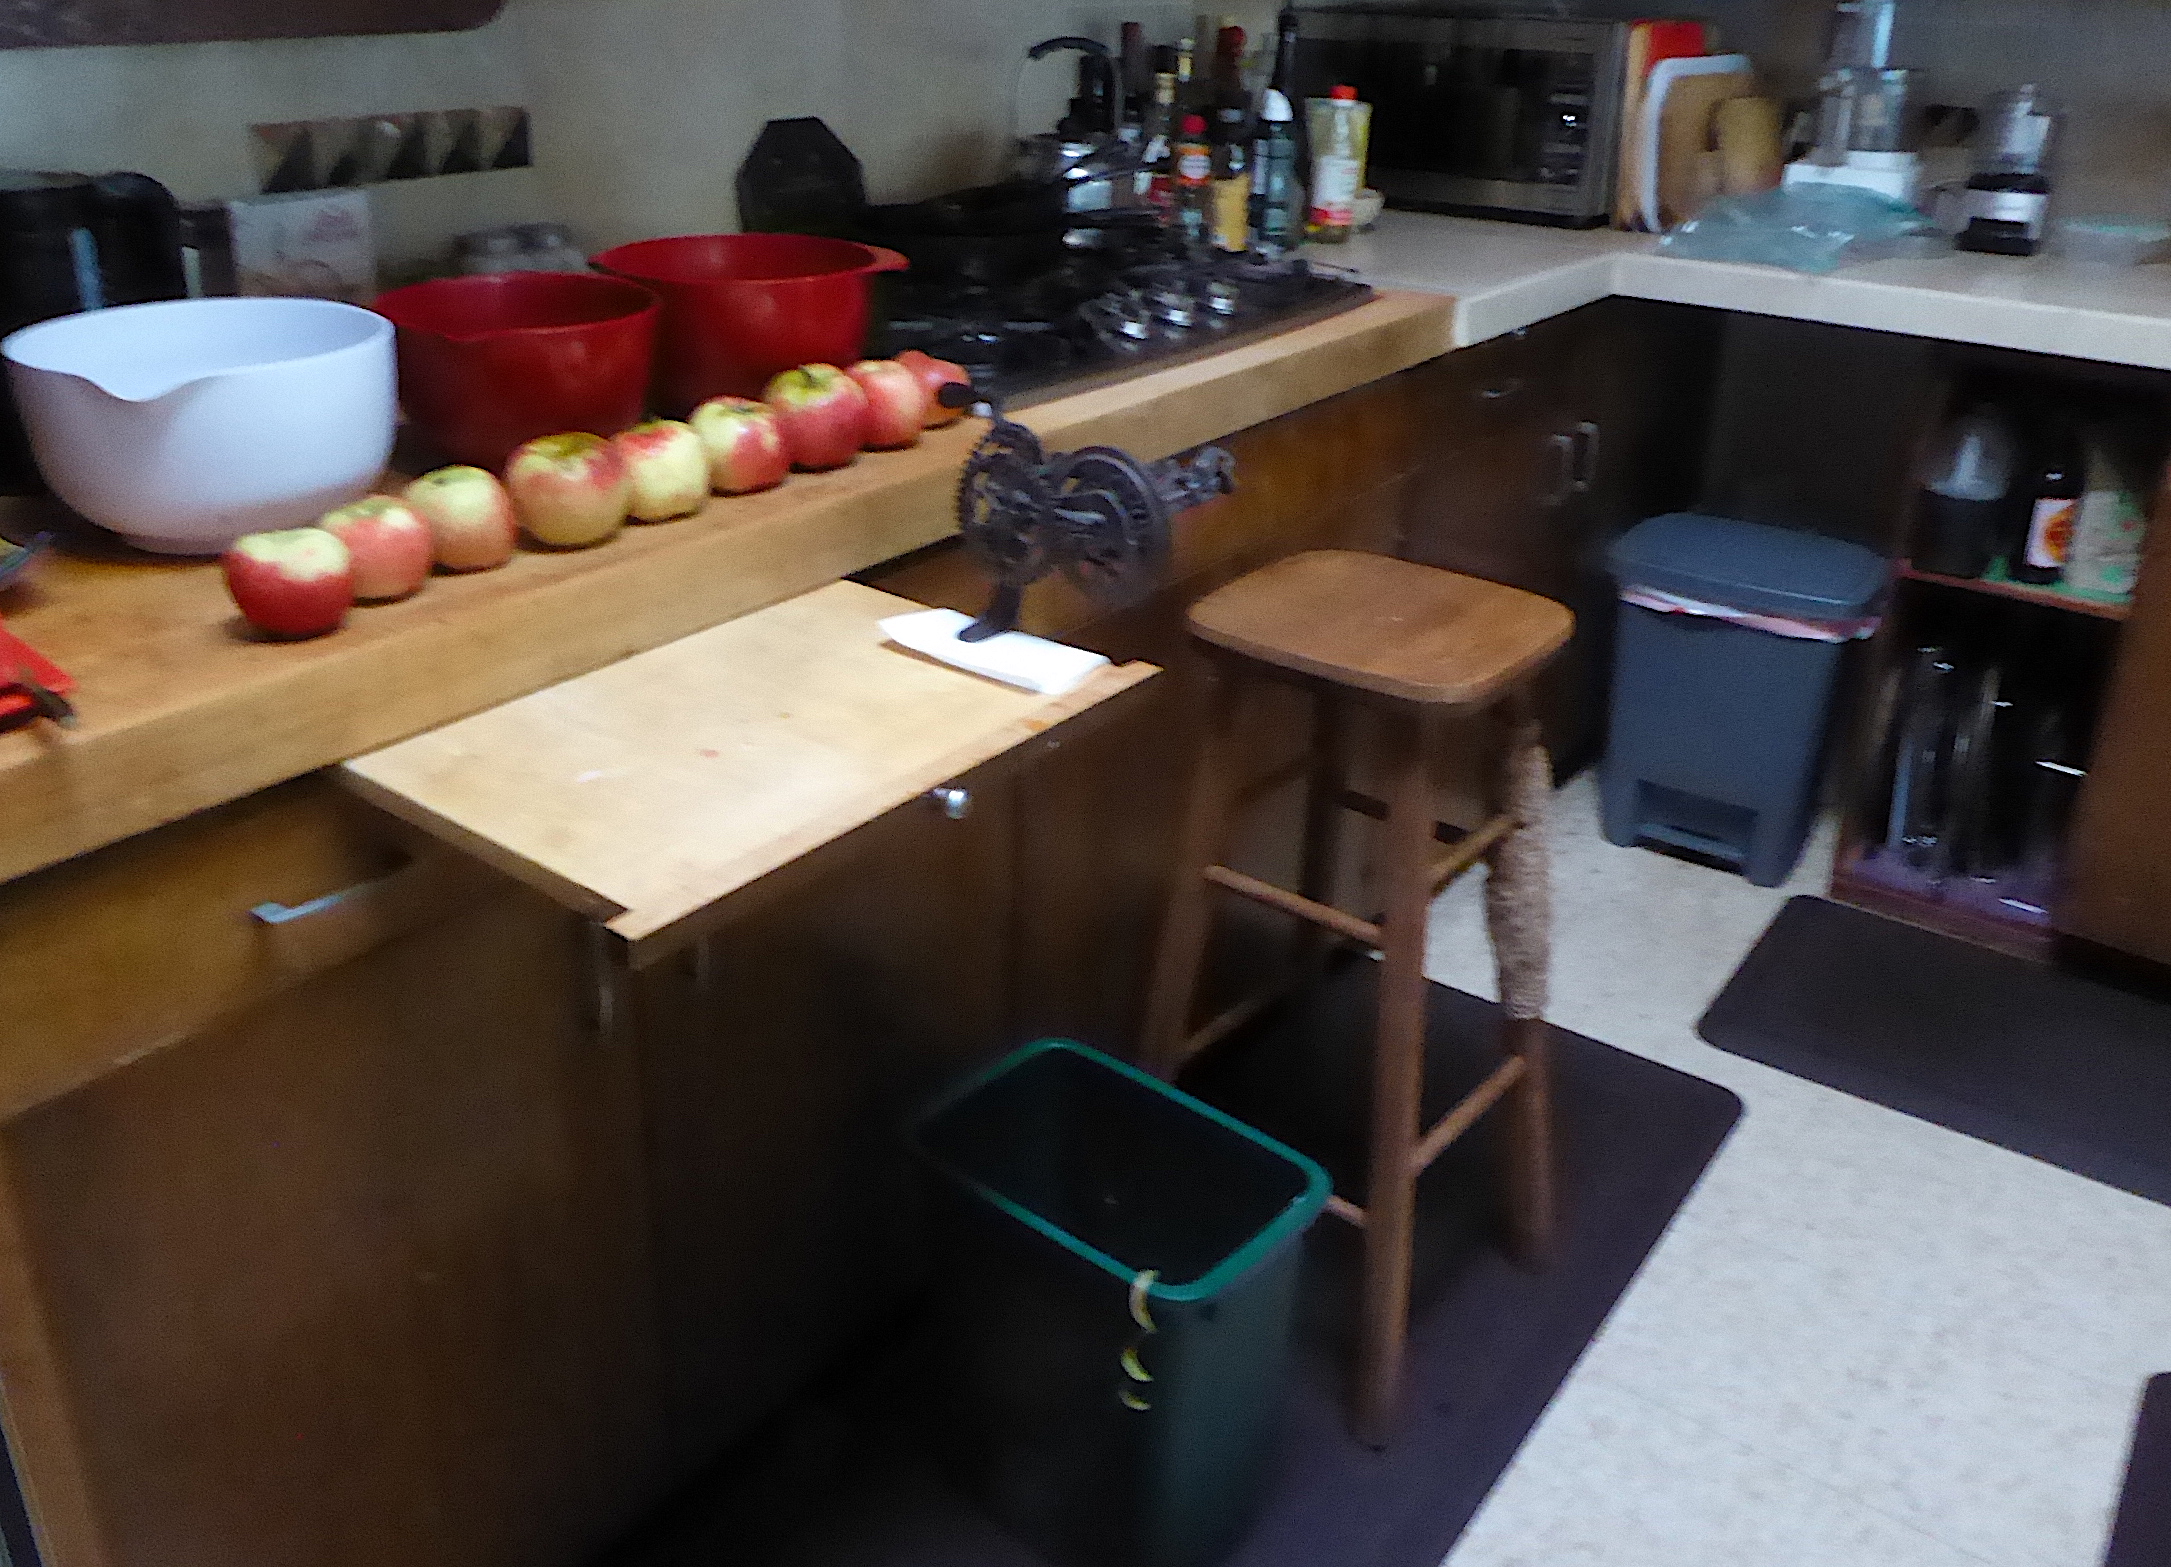 A set up in the kitchen